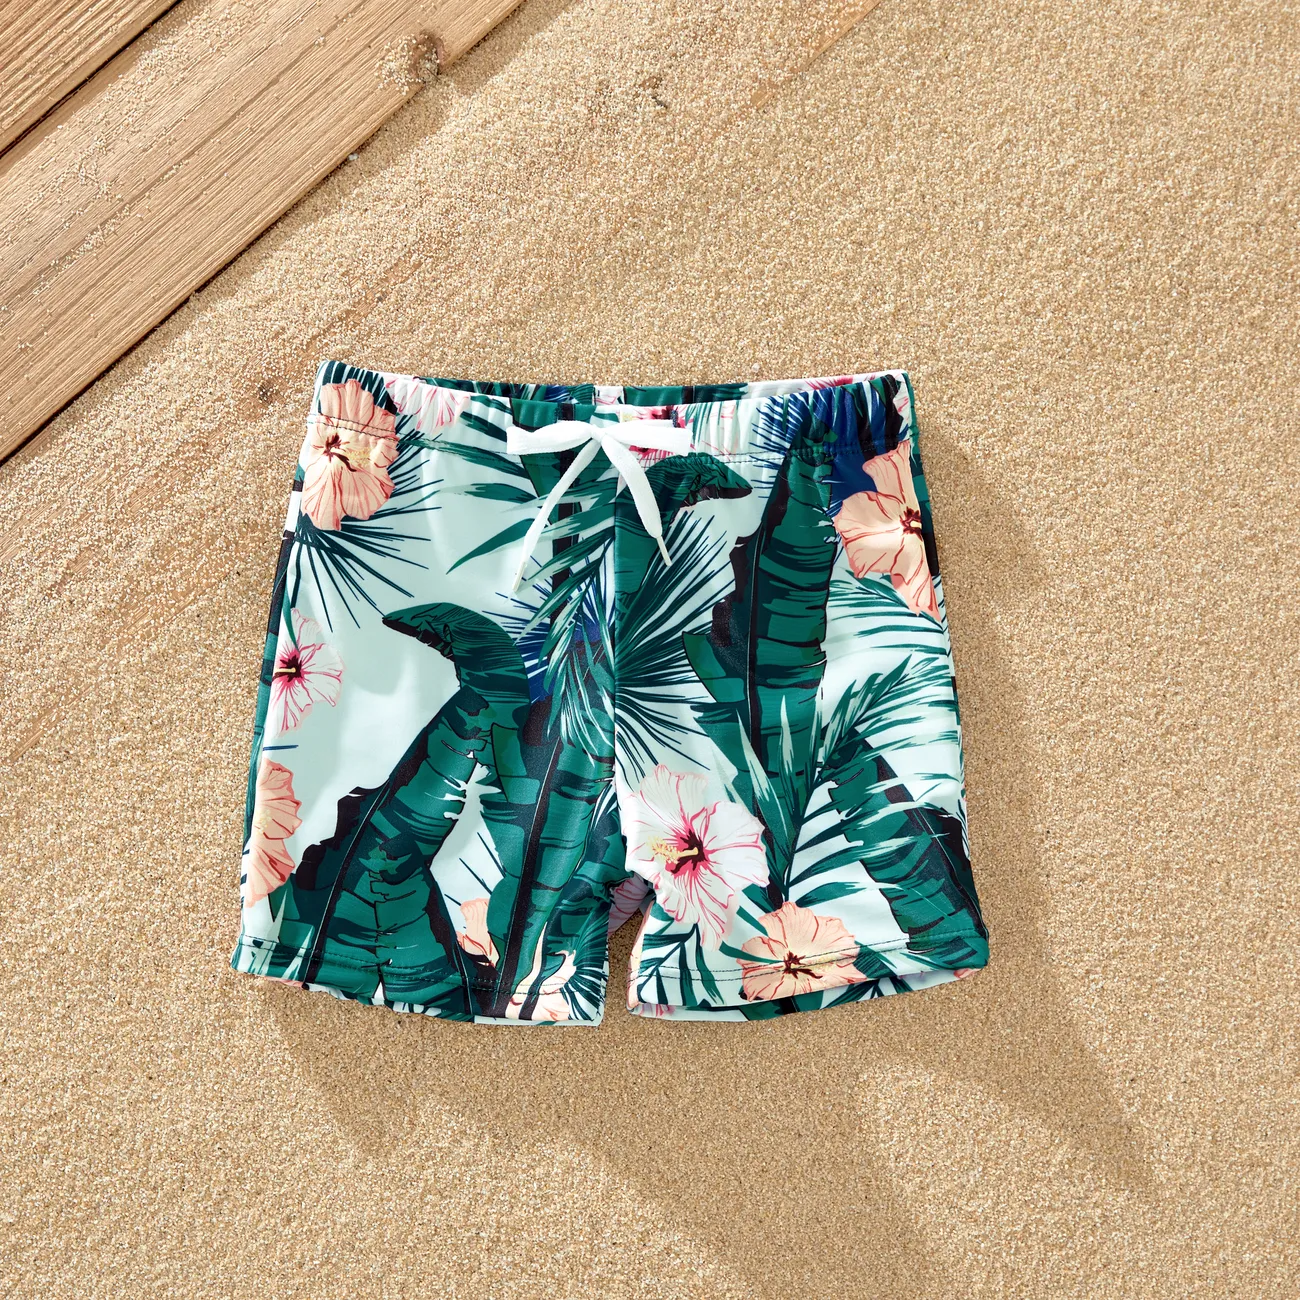 Family Matching Plant Print Ruffle Trim Spliced One-piece Swimsuit or Swim Trunks Green big image 1